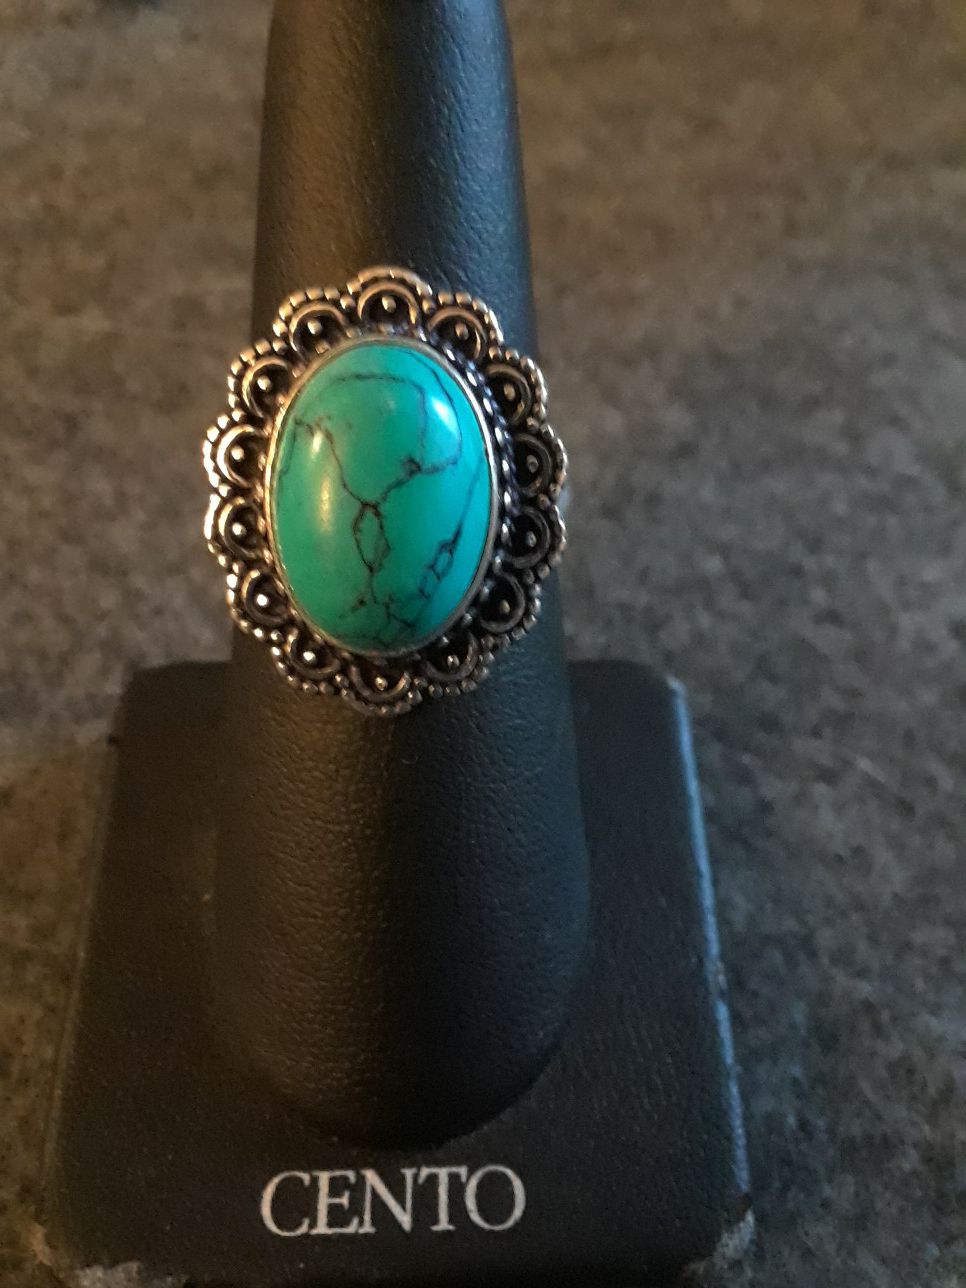 Sterling silver Turquoise Ring